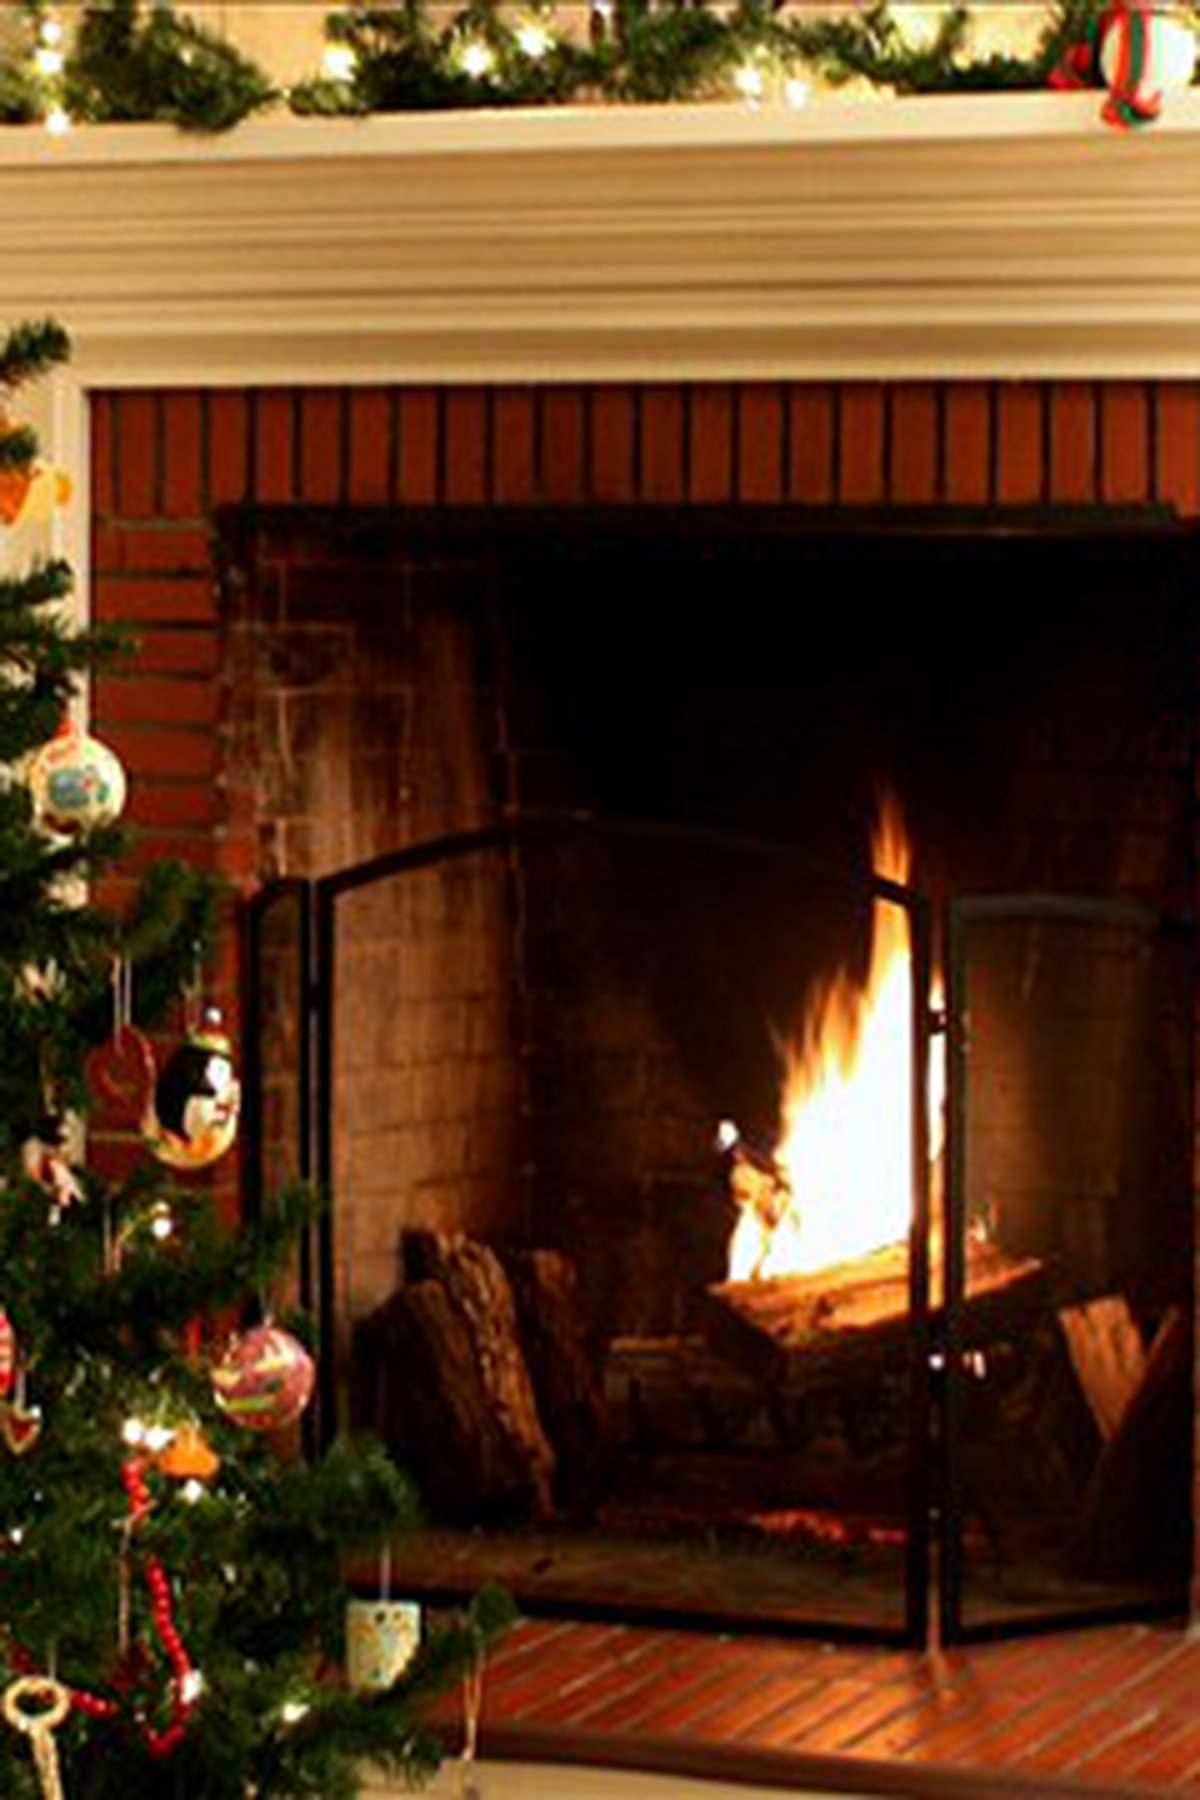 Dry real Christmas trees pose real fire hazard